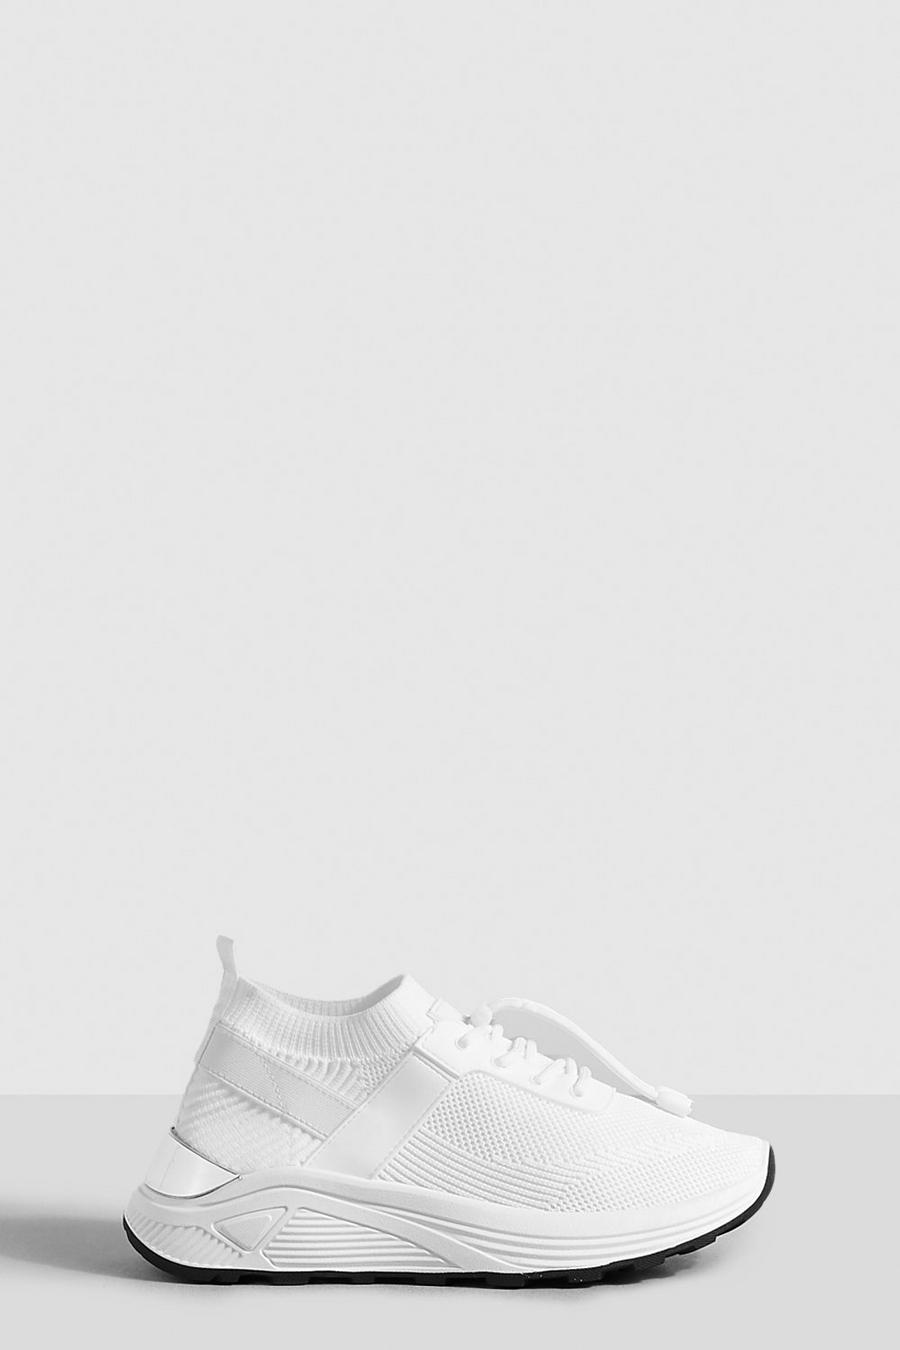 White weiß Knit Lace Up Trainers